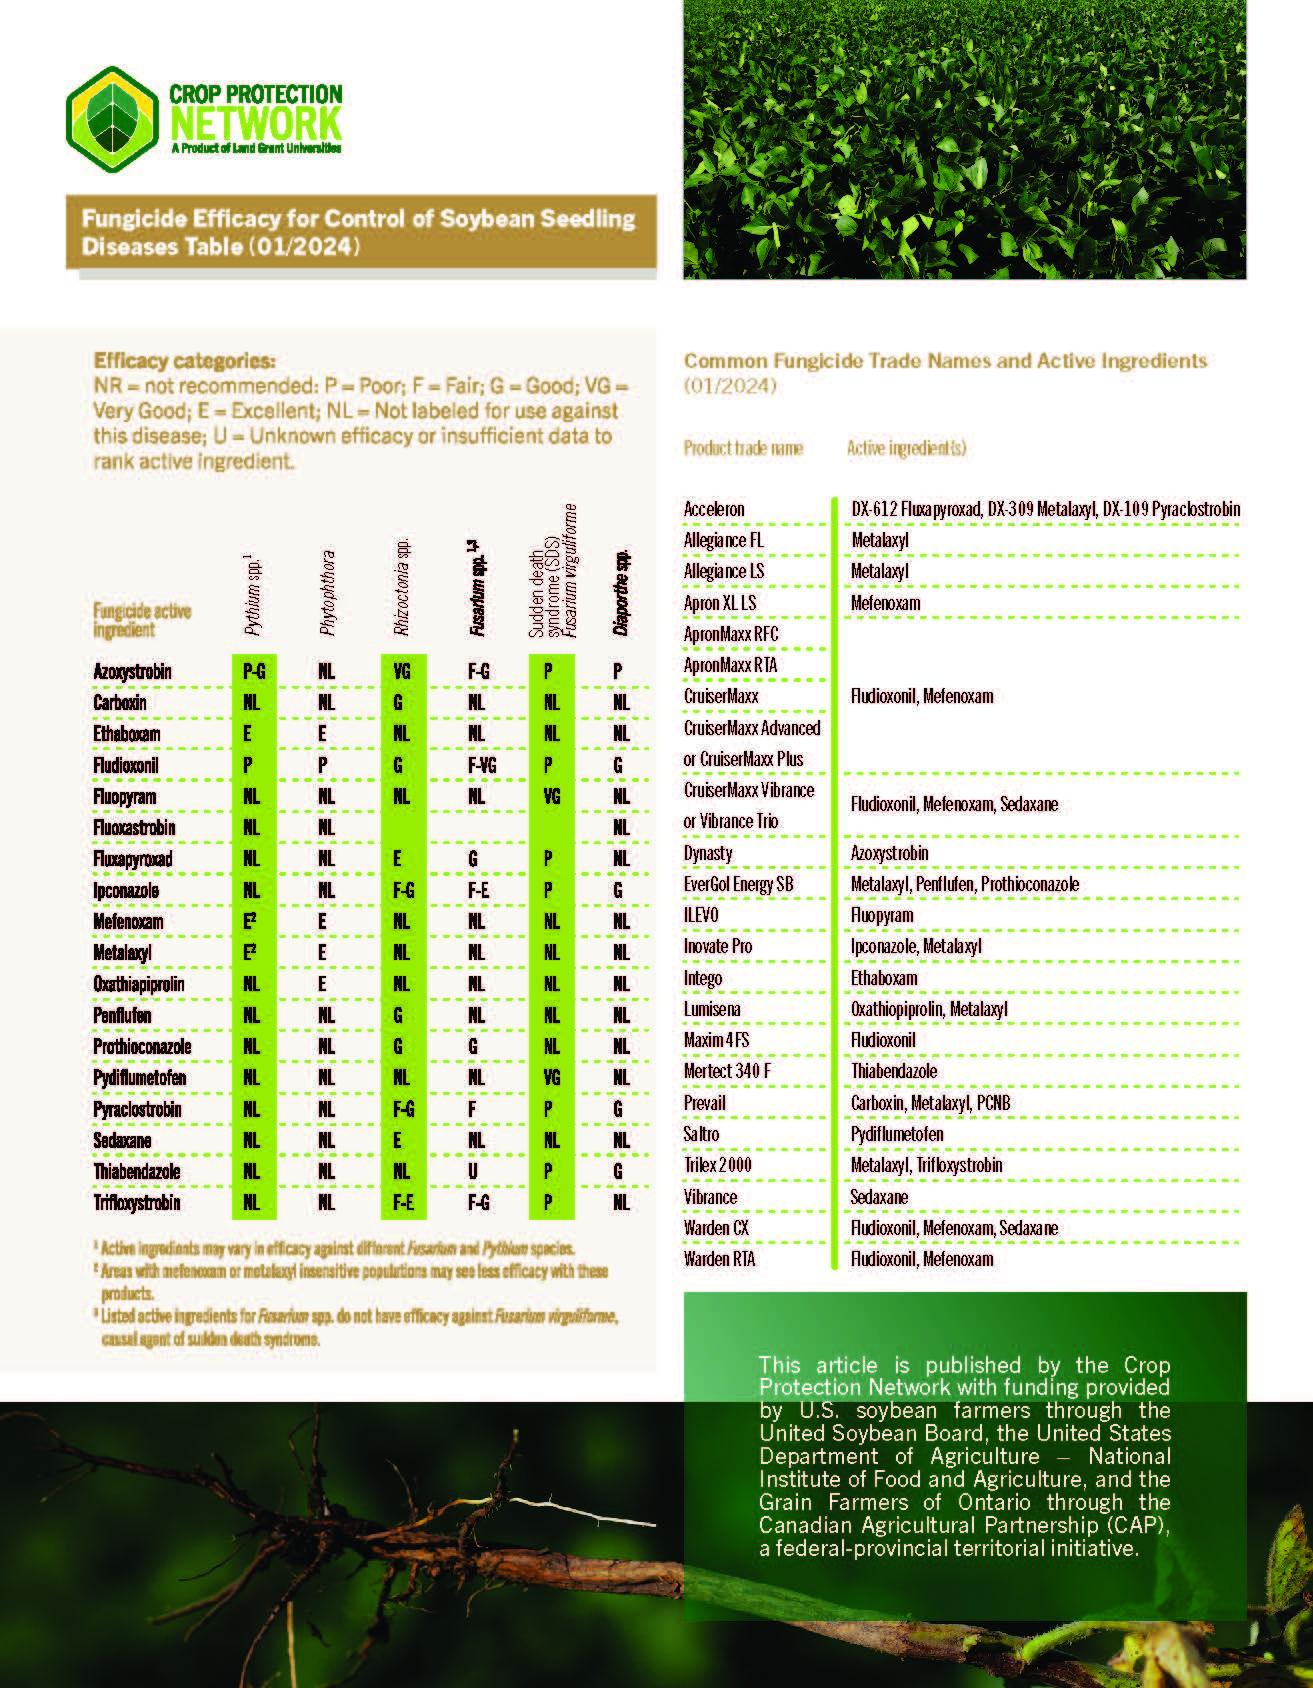 Fungicide Efficacy for Control of Soybean Seedling Diseases Table - Page 2